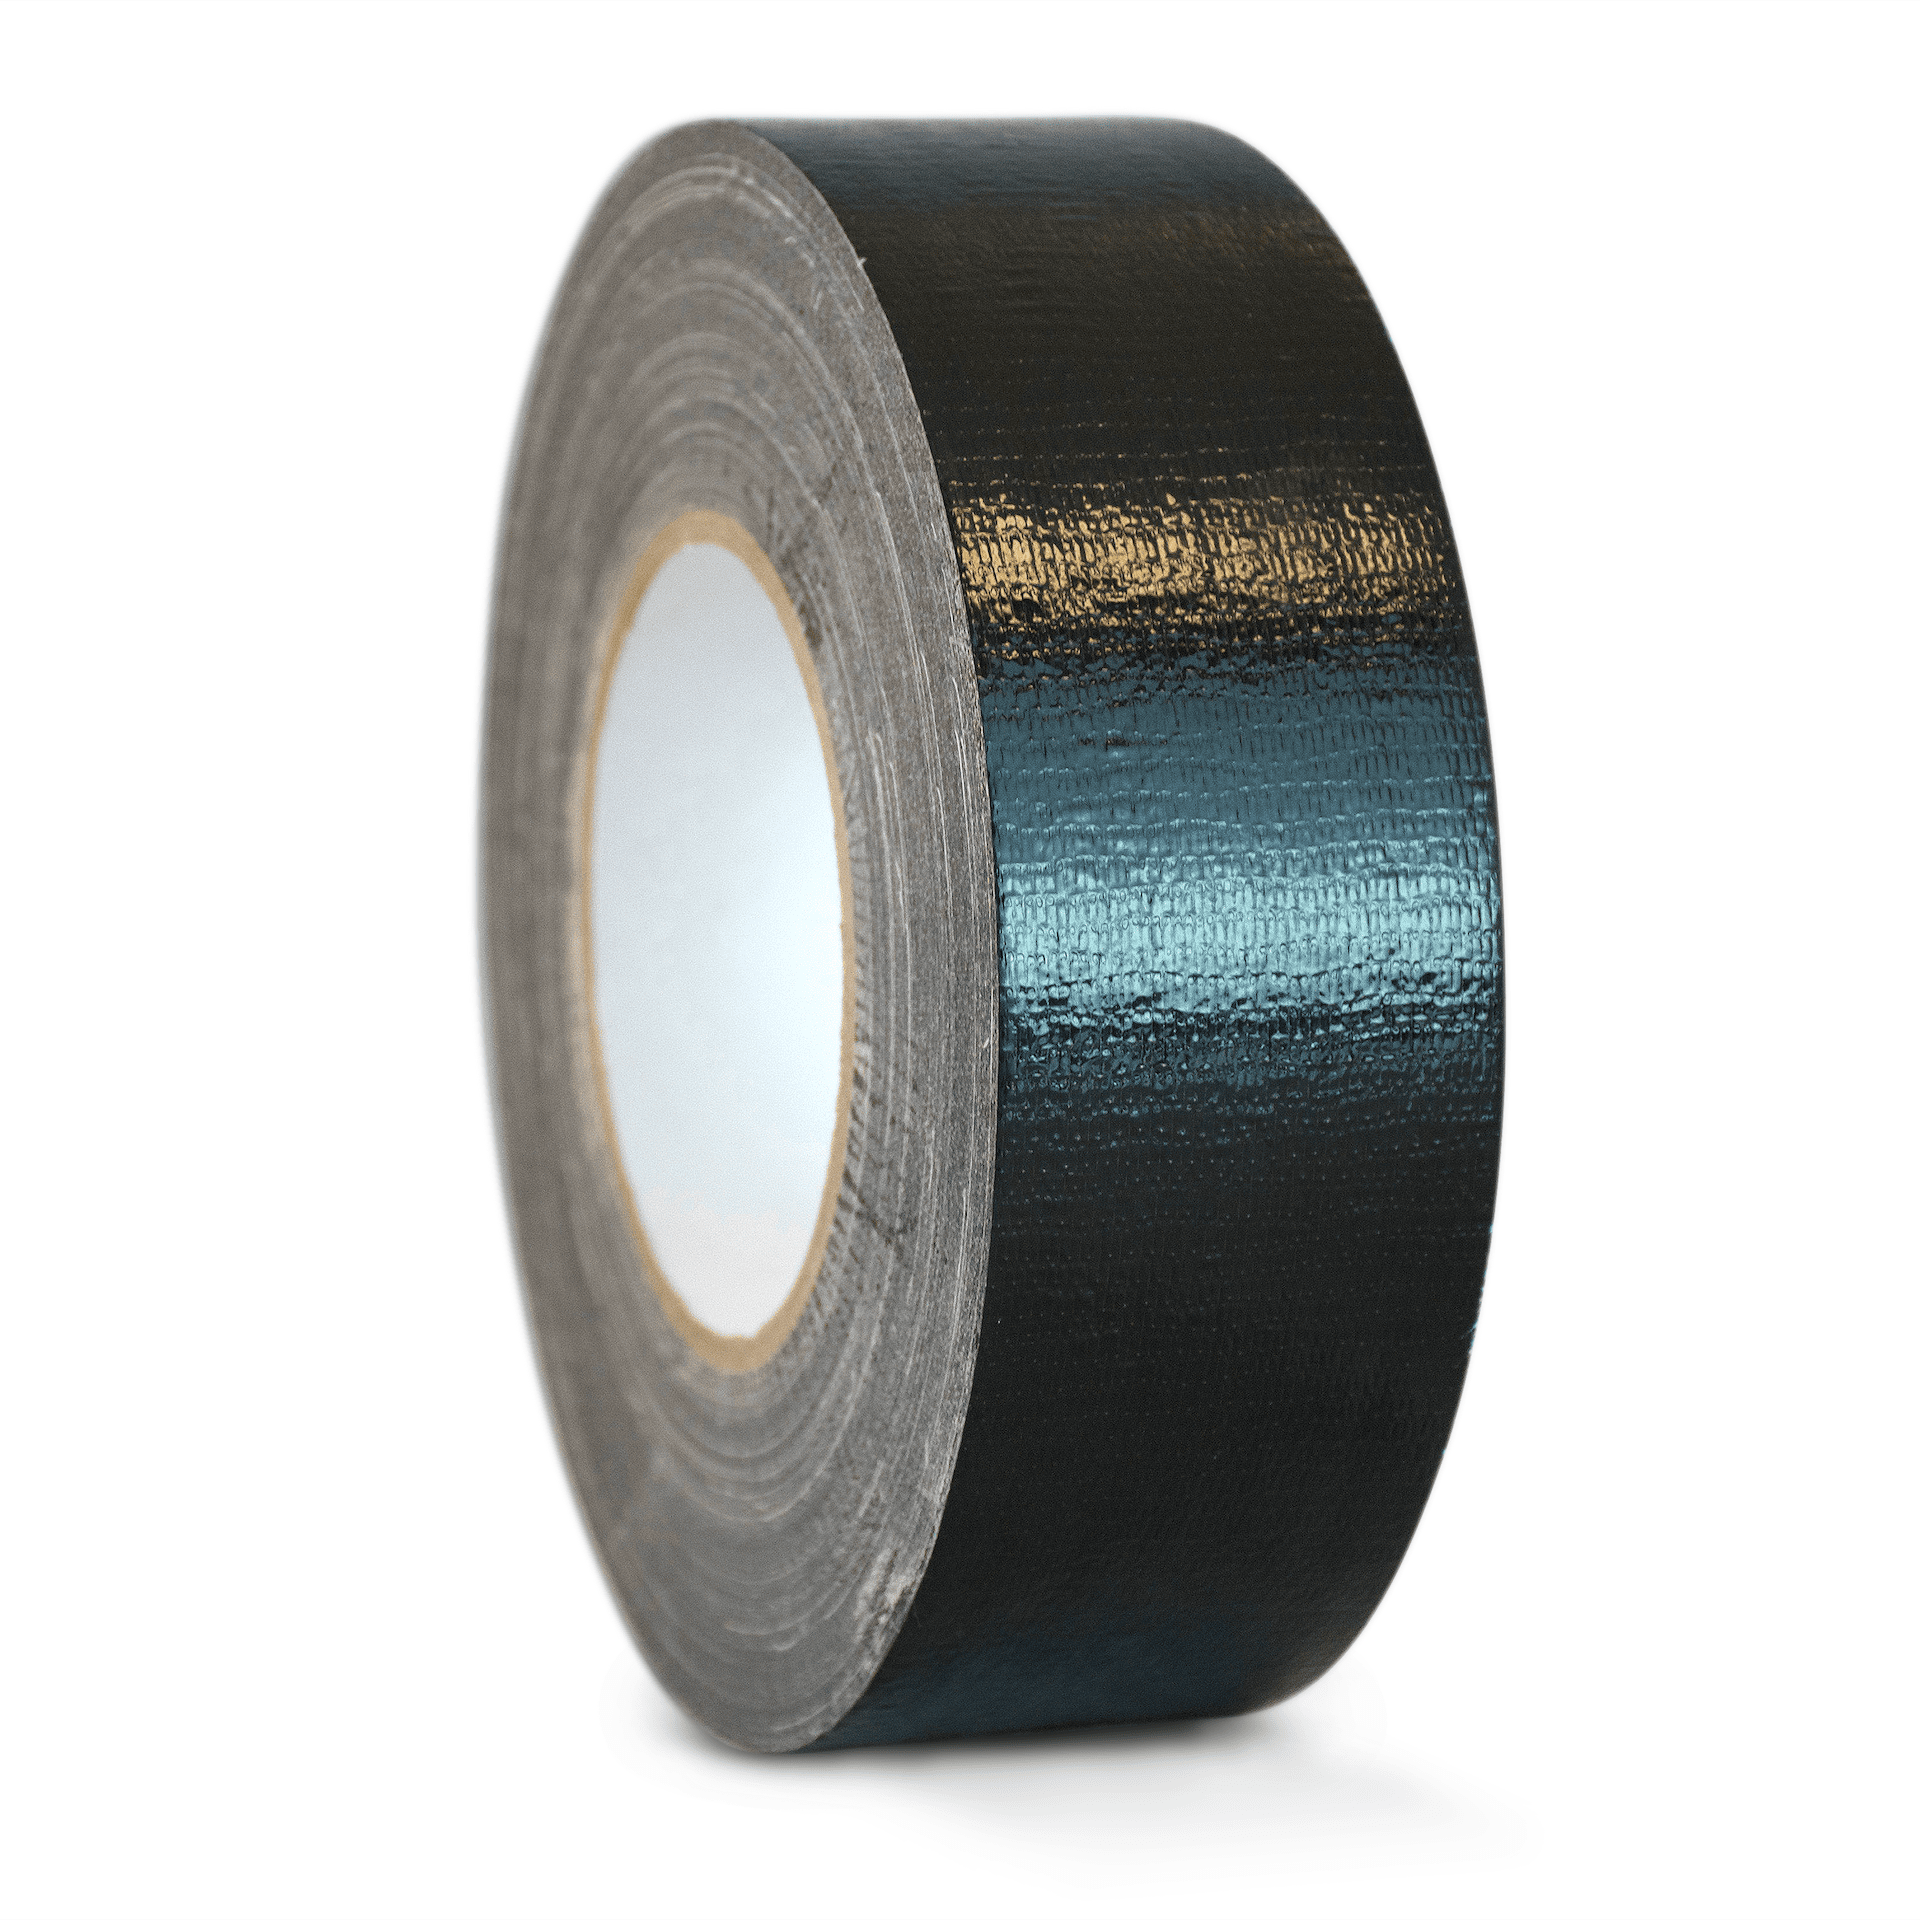 Gray Duct Tape 1/2 inc... WOD DTC10 Advanced Strength Industrial Grade Silver 